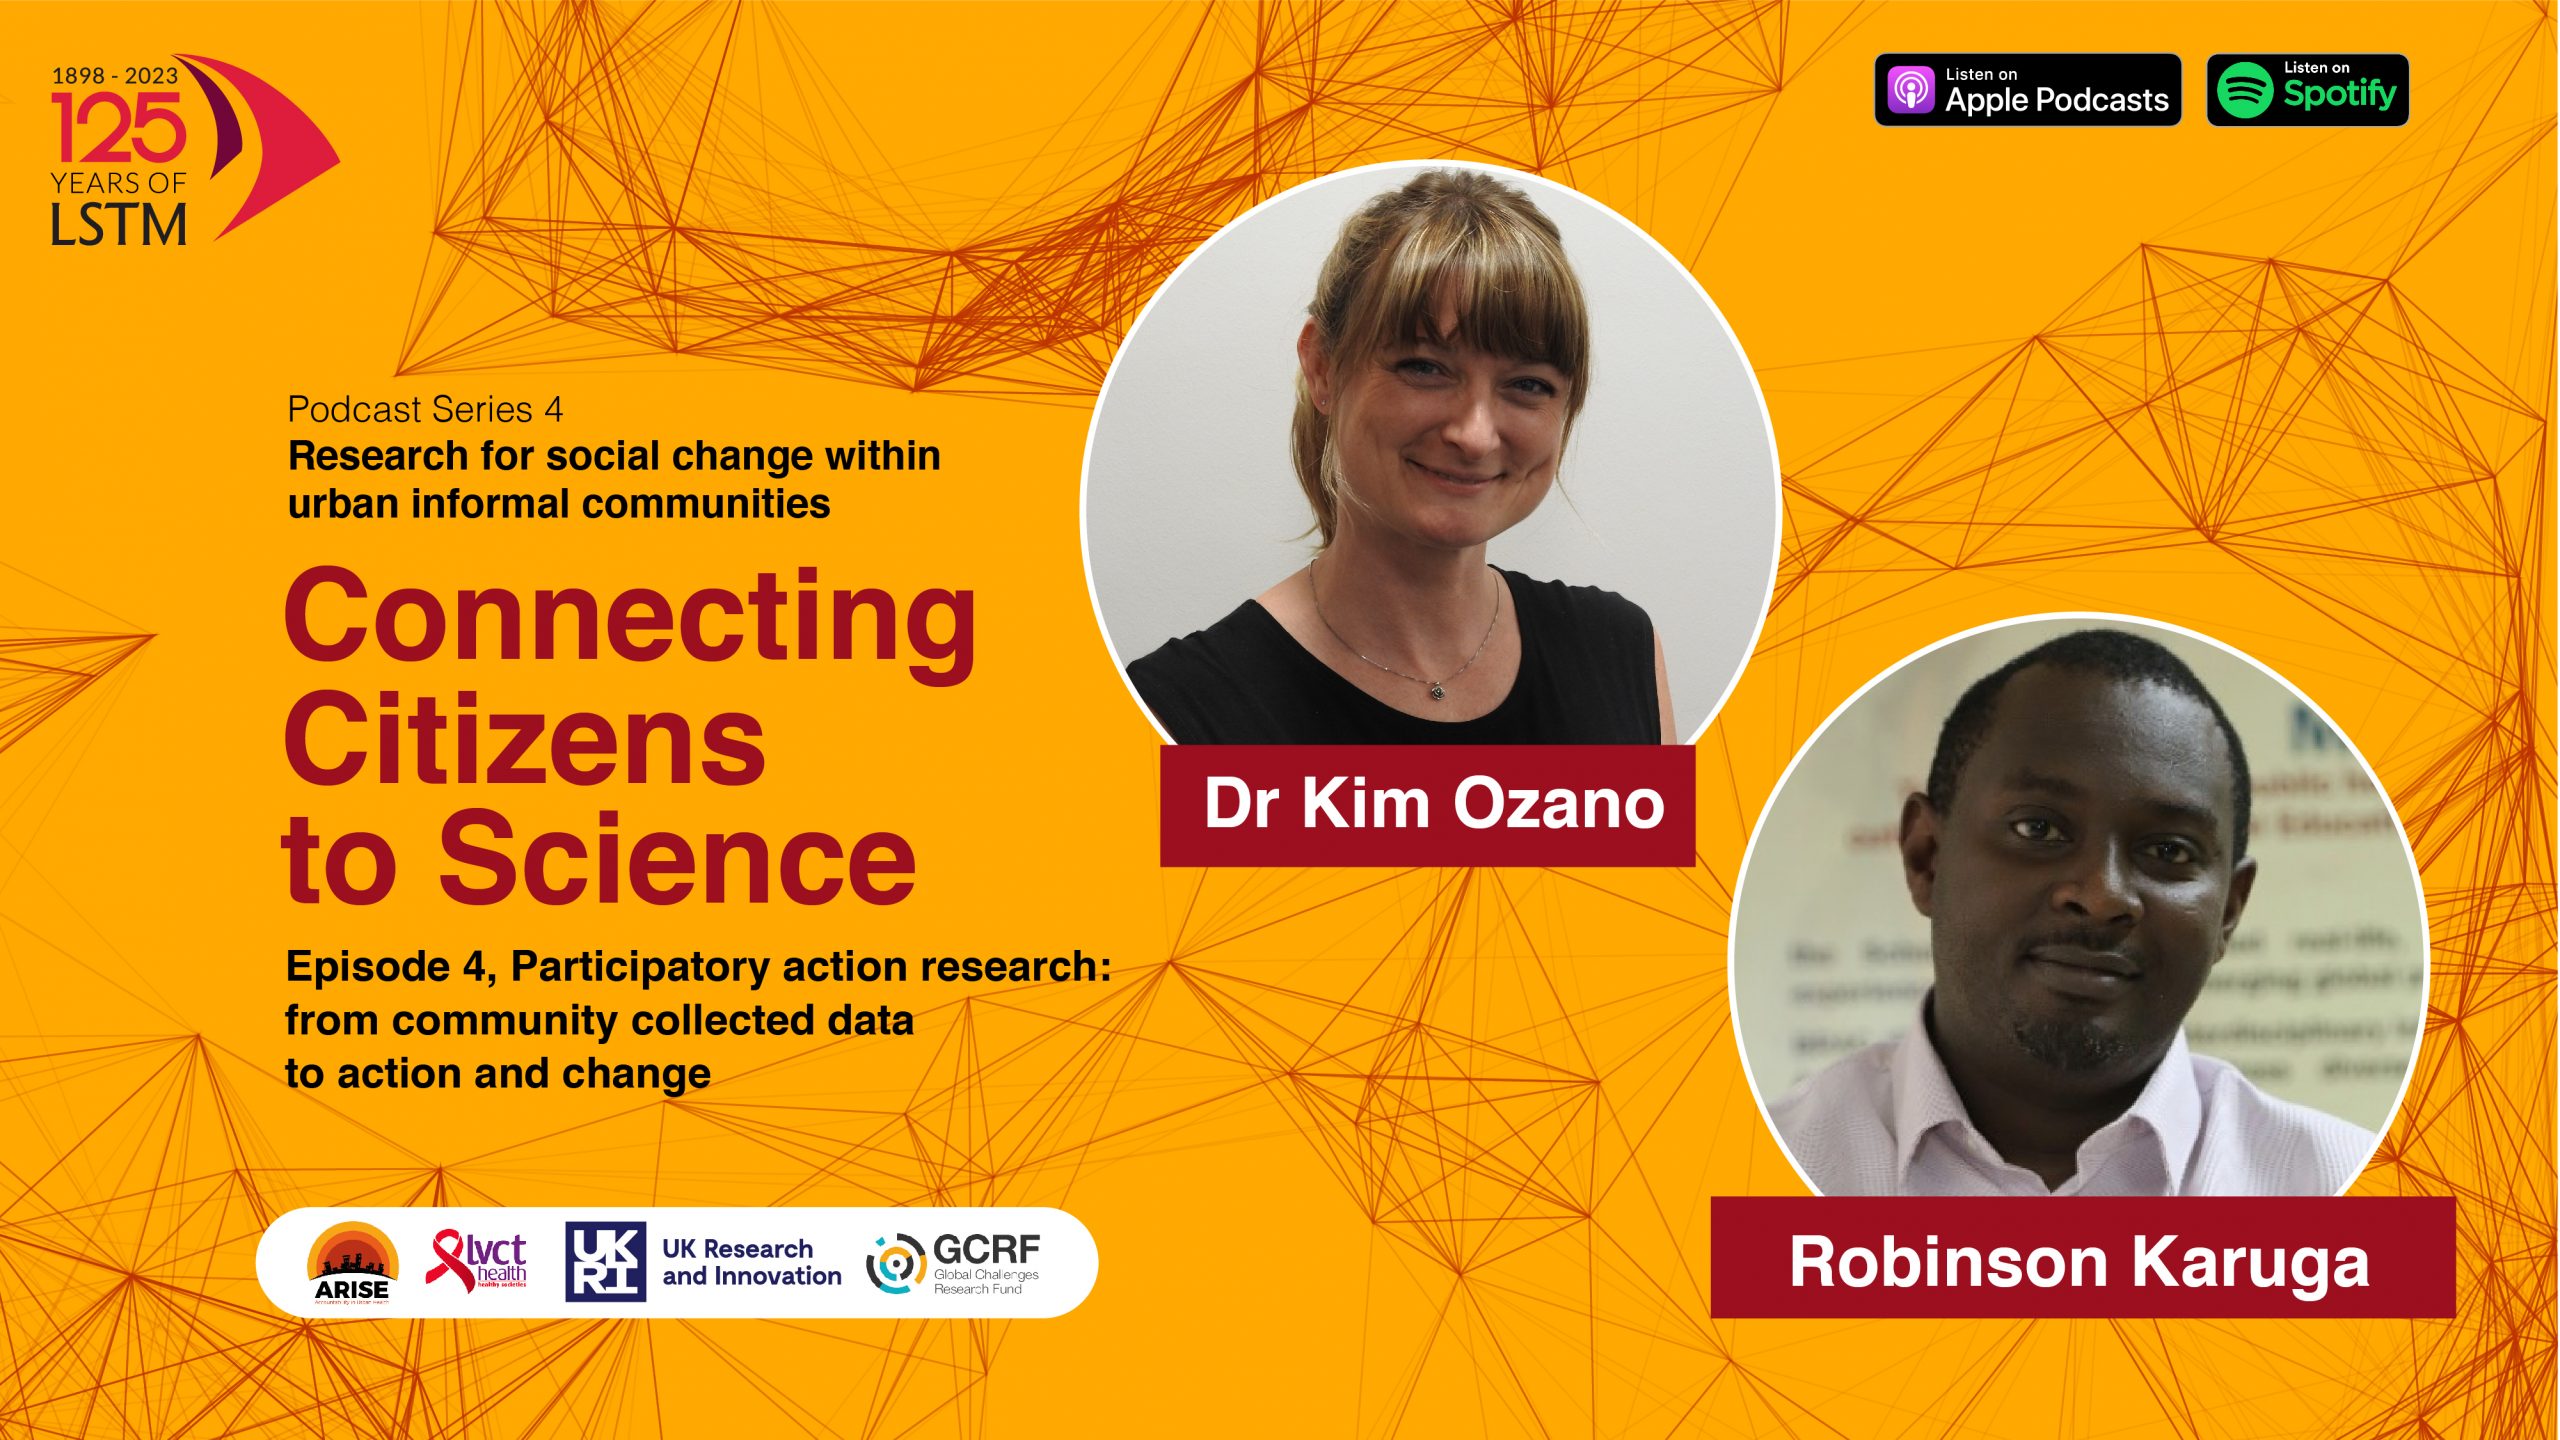 Connecting Citizens to Science - S4E4 - Participatory action research: from community collected data to action and change